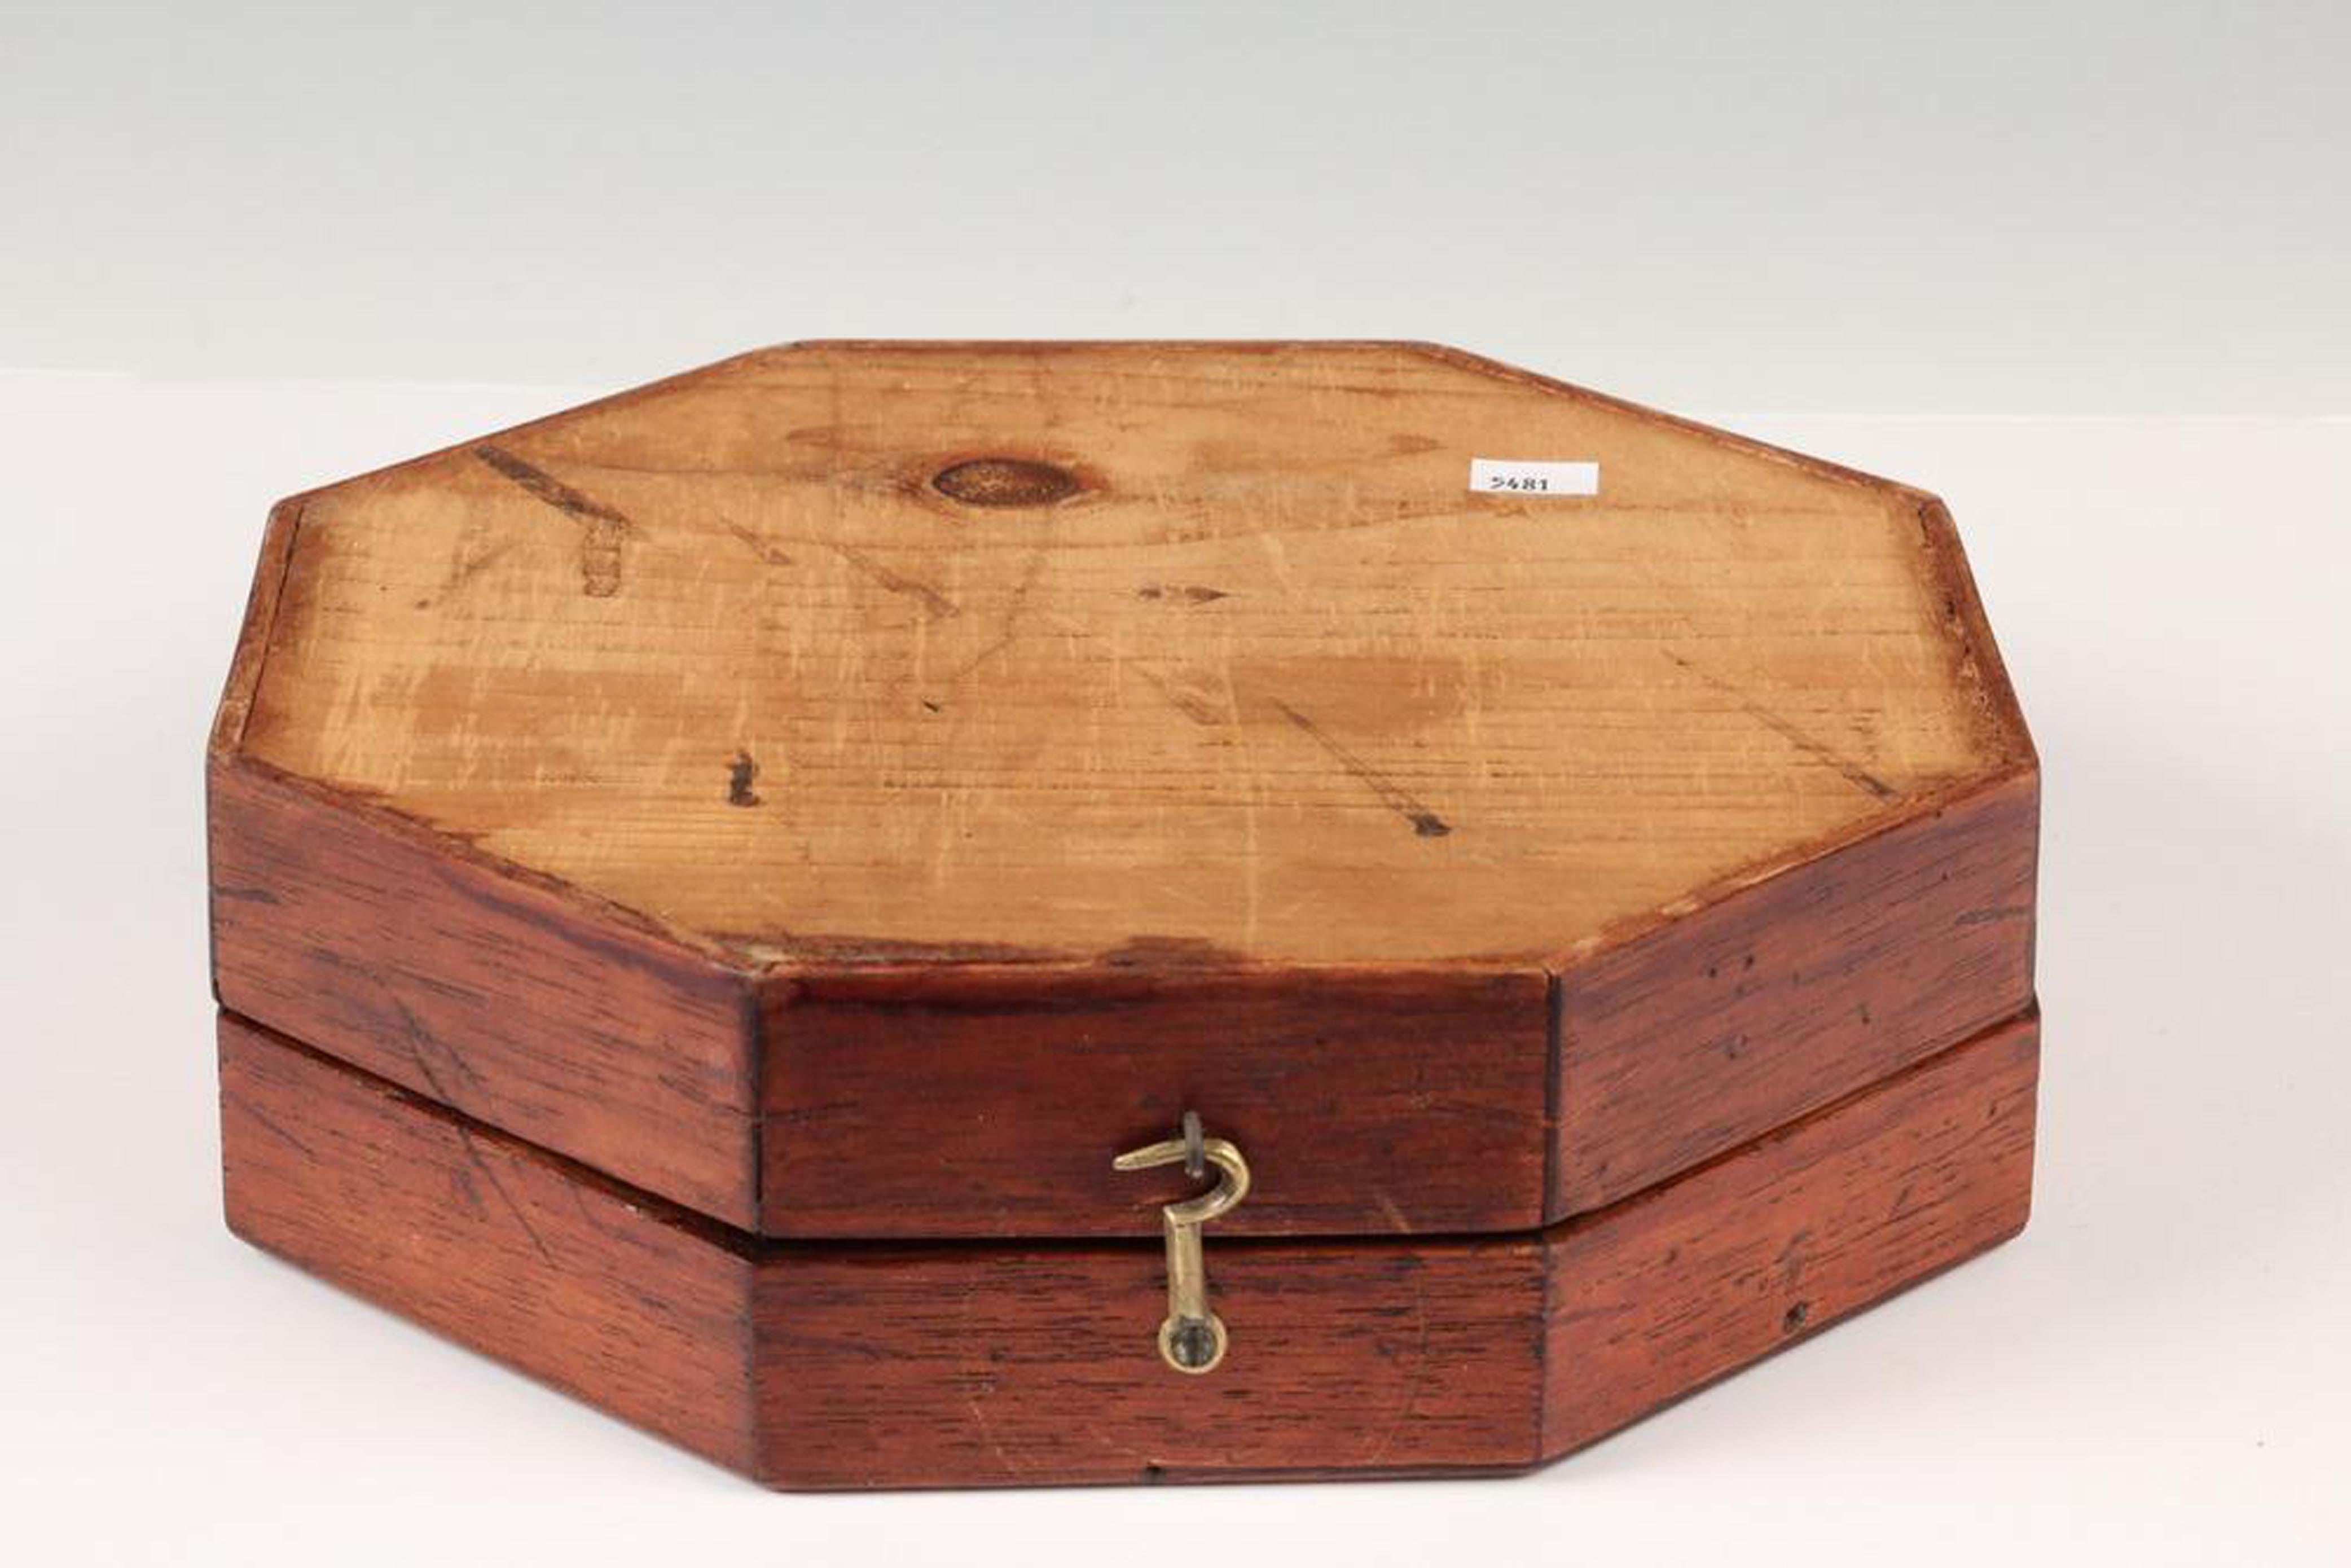 A double sailor's valentine, arranged multi-color shells in a hinged octagonal wooden case with heart and circular shaped motifs.

One side of case exterior is unfinished, 

Measures: case (closed): 3